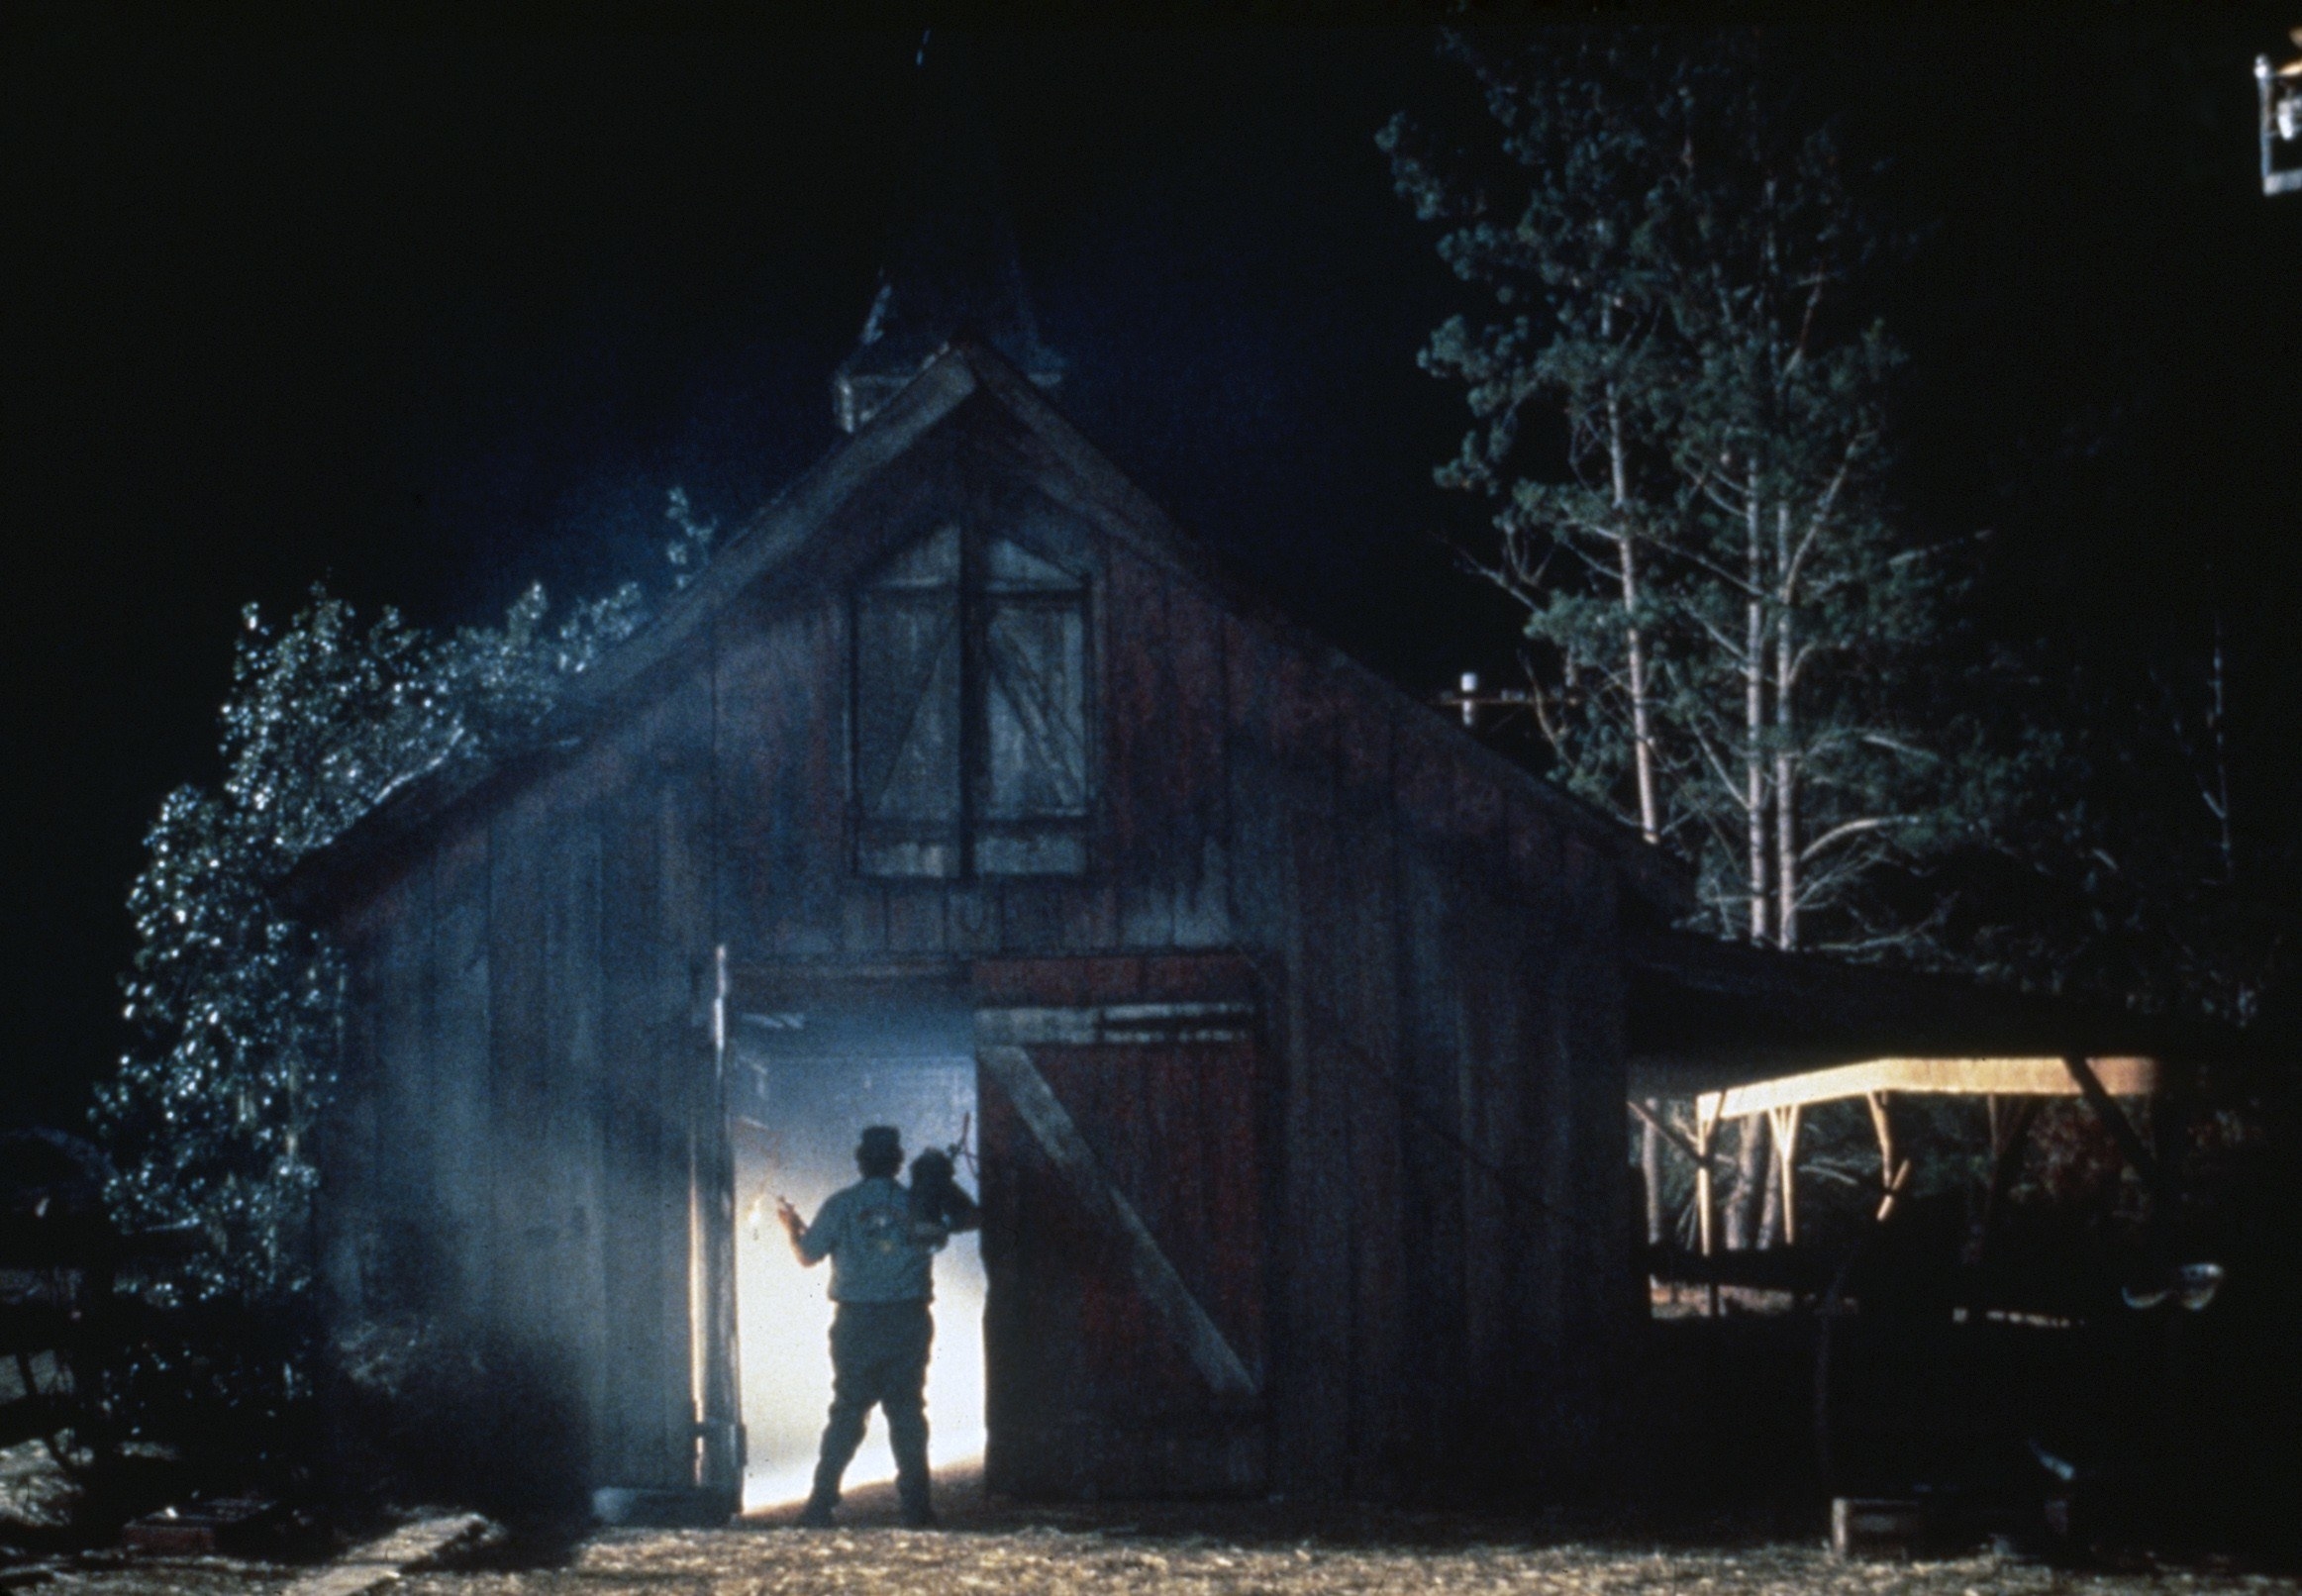 A man stands in front of a brightly lit cabin